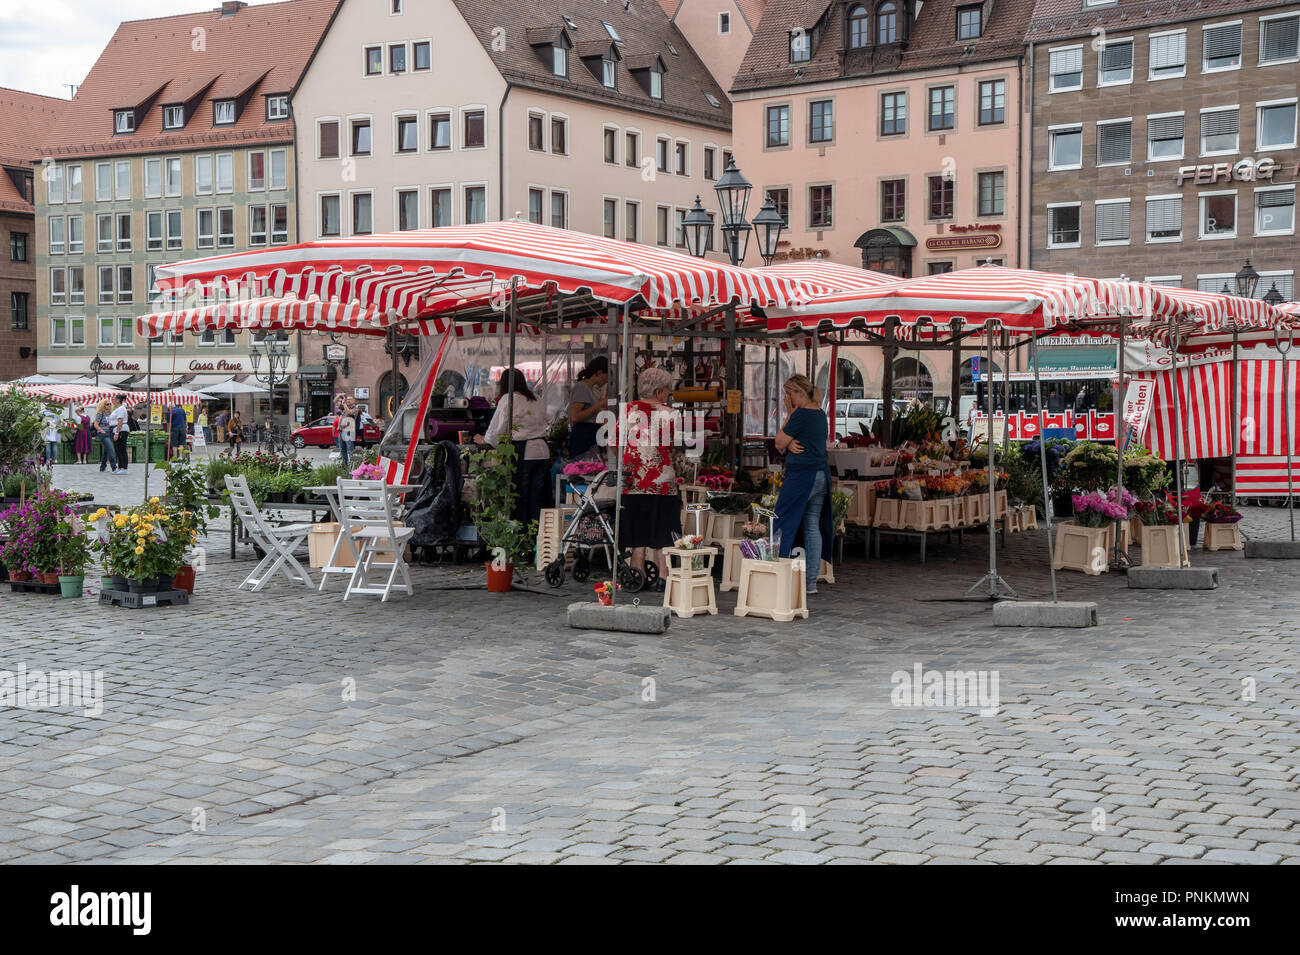 Vendors sell produce and gifts in Nuremberg Market Square Stock Photo